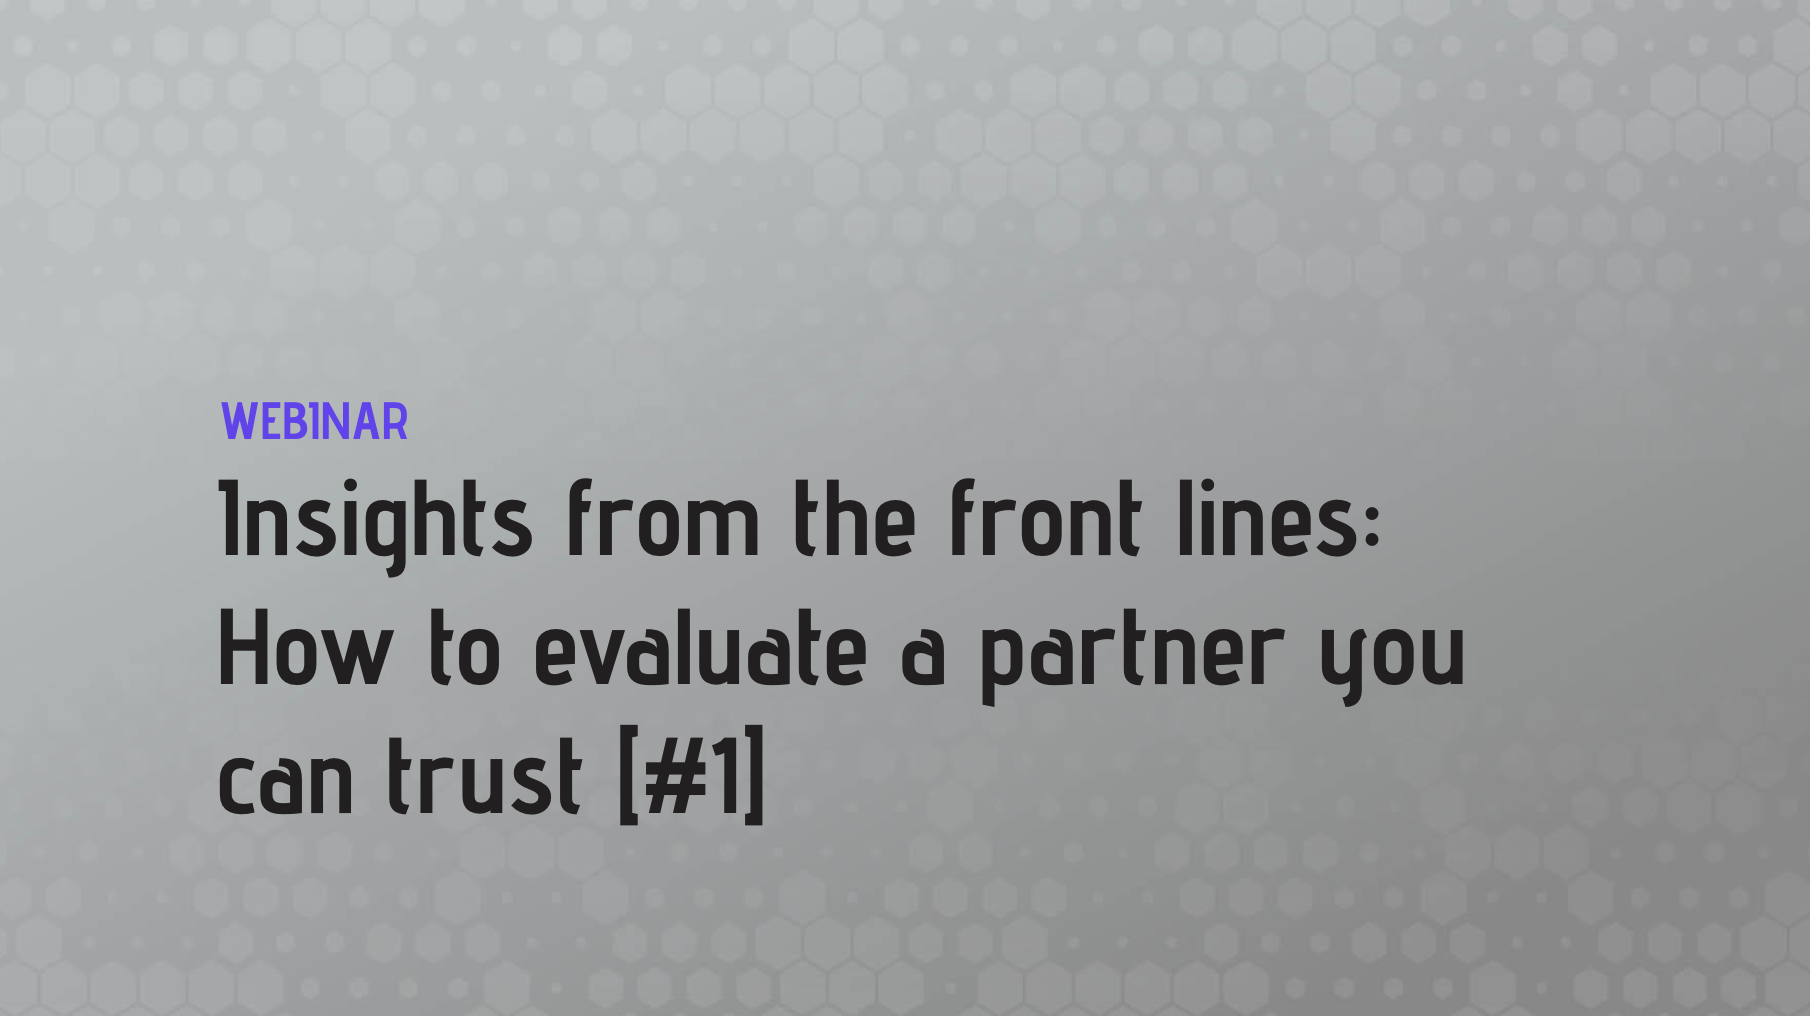 Insights from the front lines: How to evaluate a partner you can trust [#1]